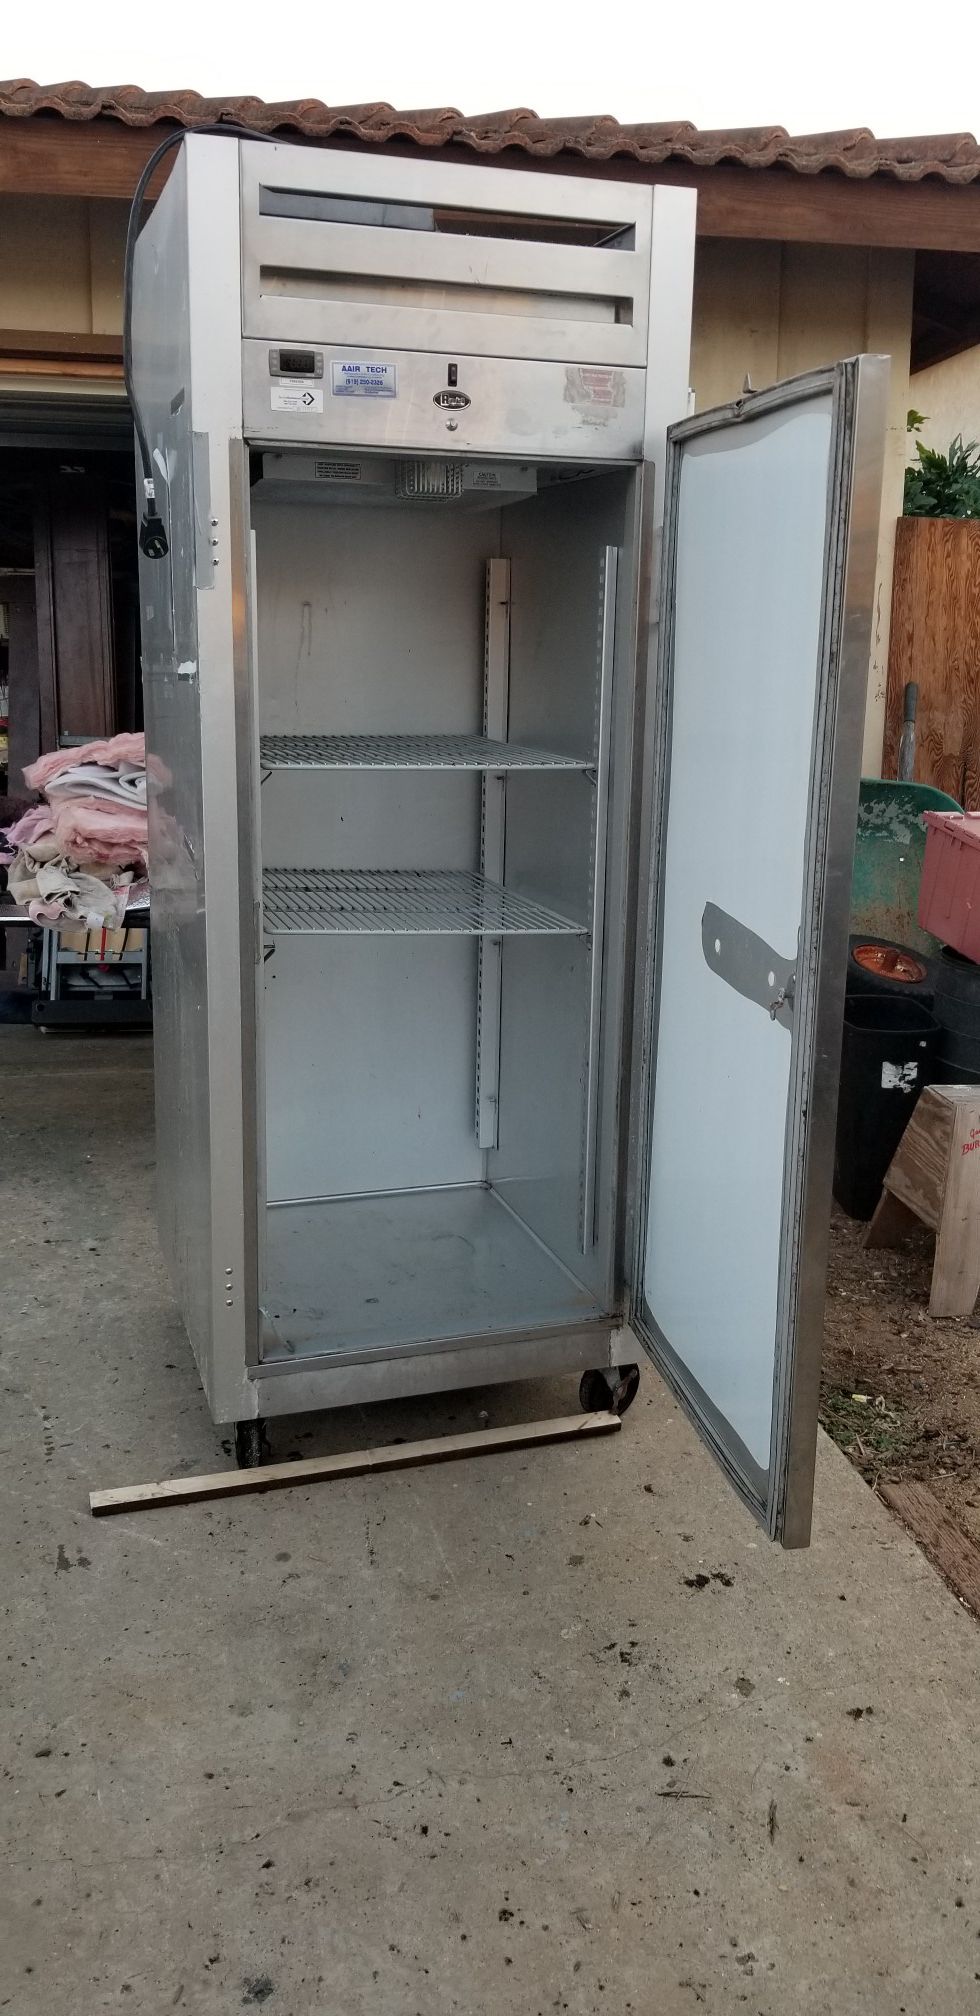 Free: Commercial freezer. Not staying cold